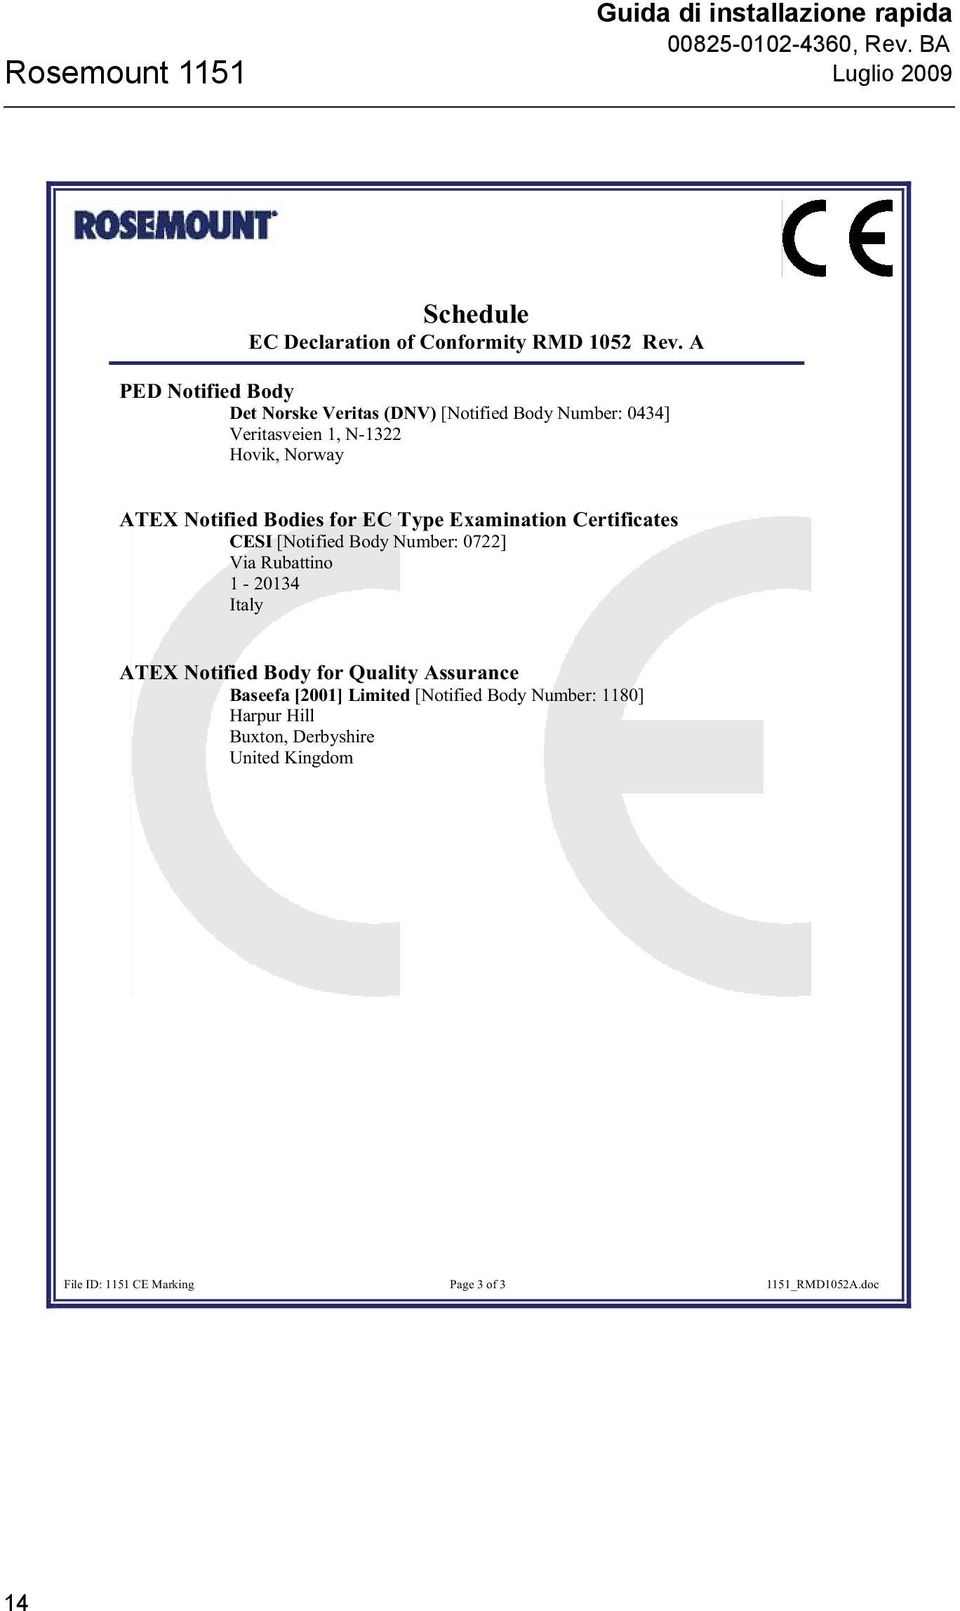 for EC Type Examination Certificates CESI [Notified Body Number: 0722] Via Rubattino 1-20134 Italy ATEX Notified Body for Quality